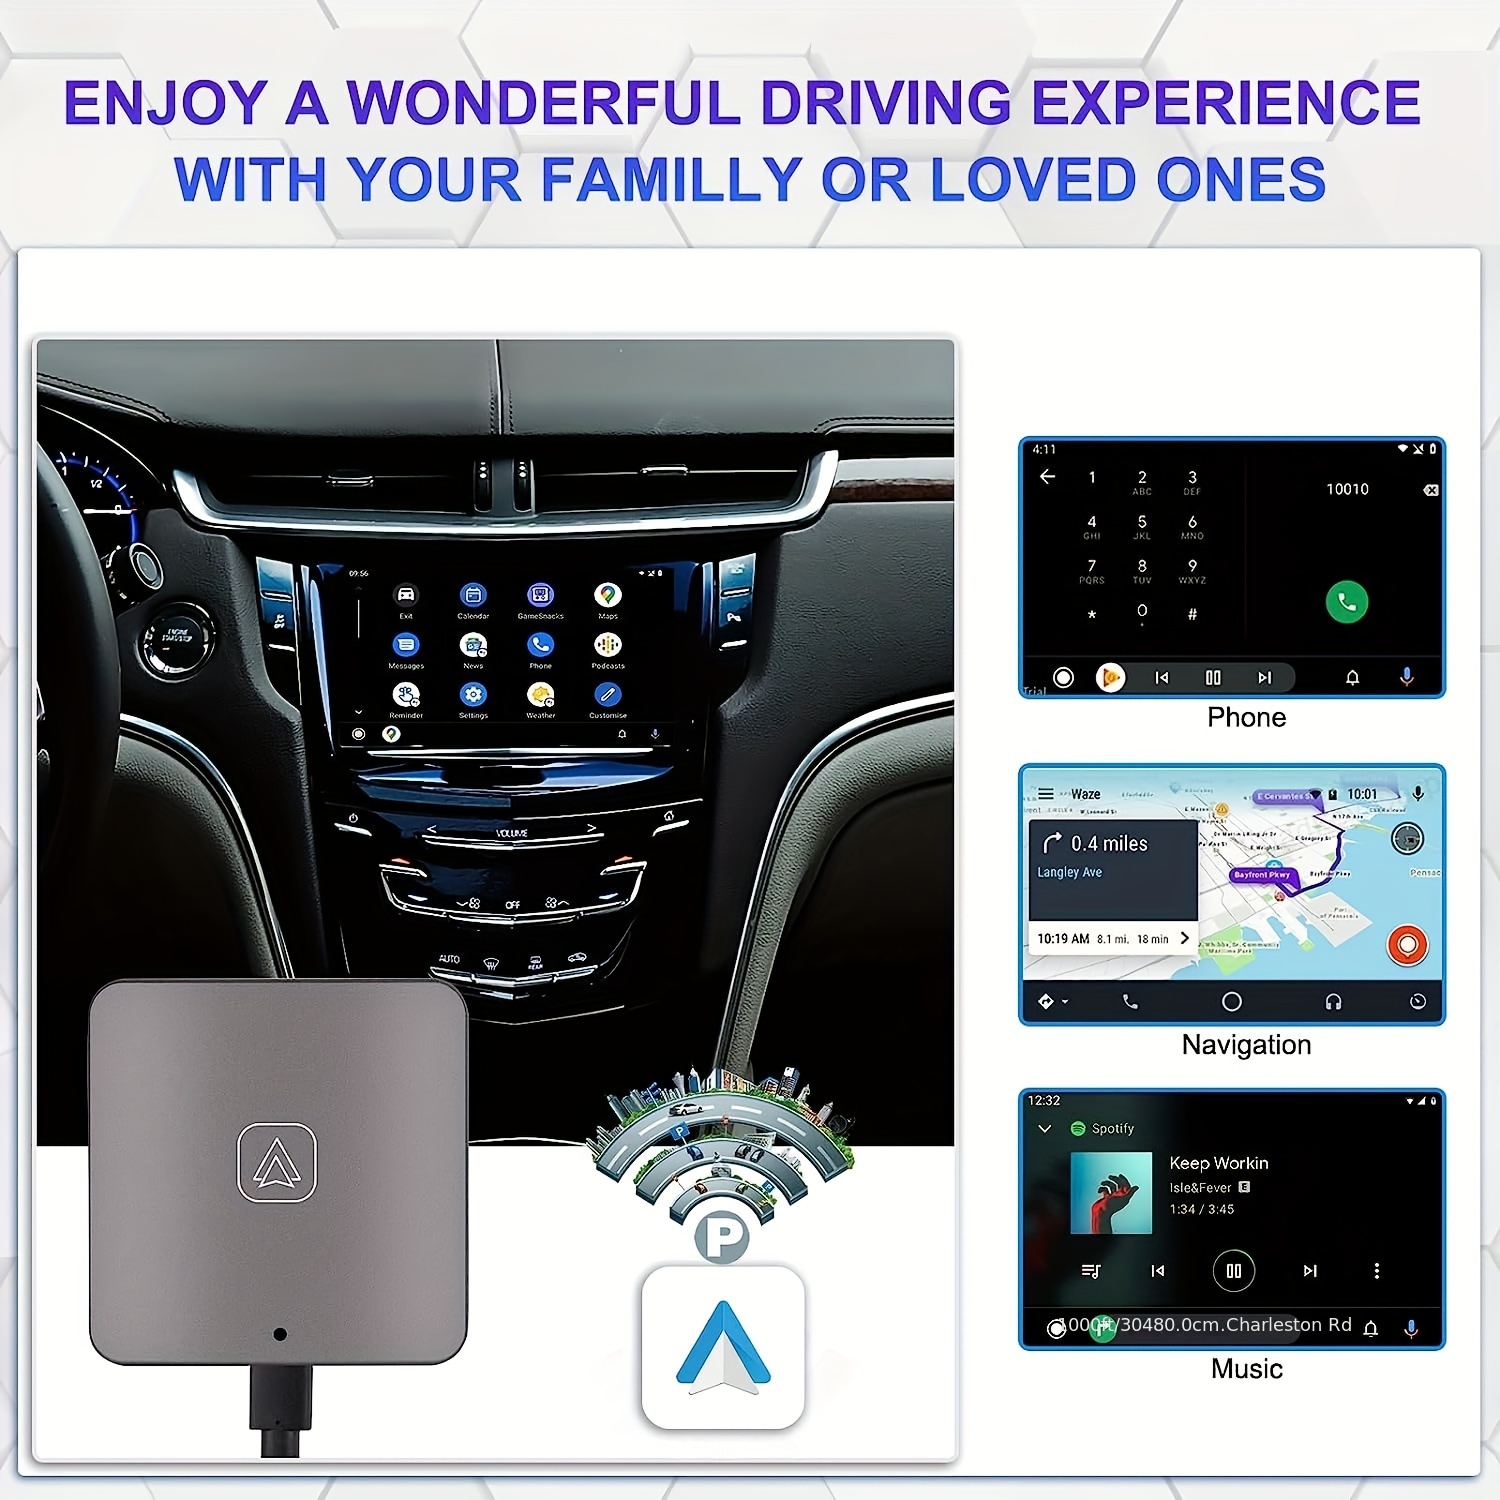 Wireless Android Auto Adapter Wireless Android Auto Magic Box, For Wired  Android Auto Cars Dongle Plug Play Wired Android Auto Required